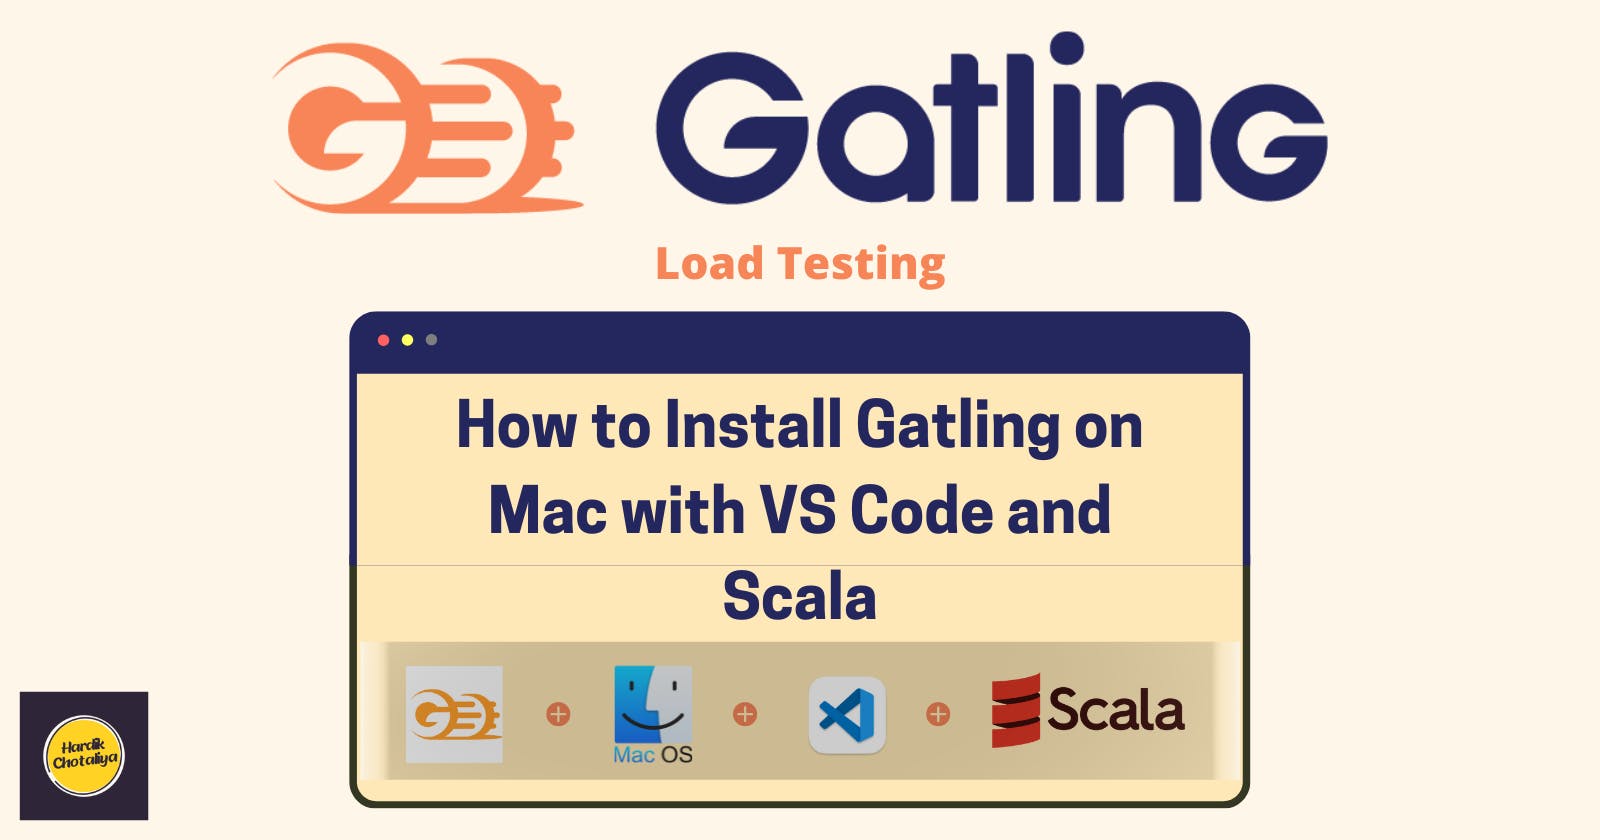 How to Install Gatling on Mac with VS Code and Scala: A Step-by-Step Guide